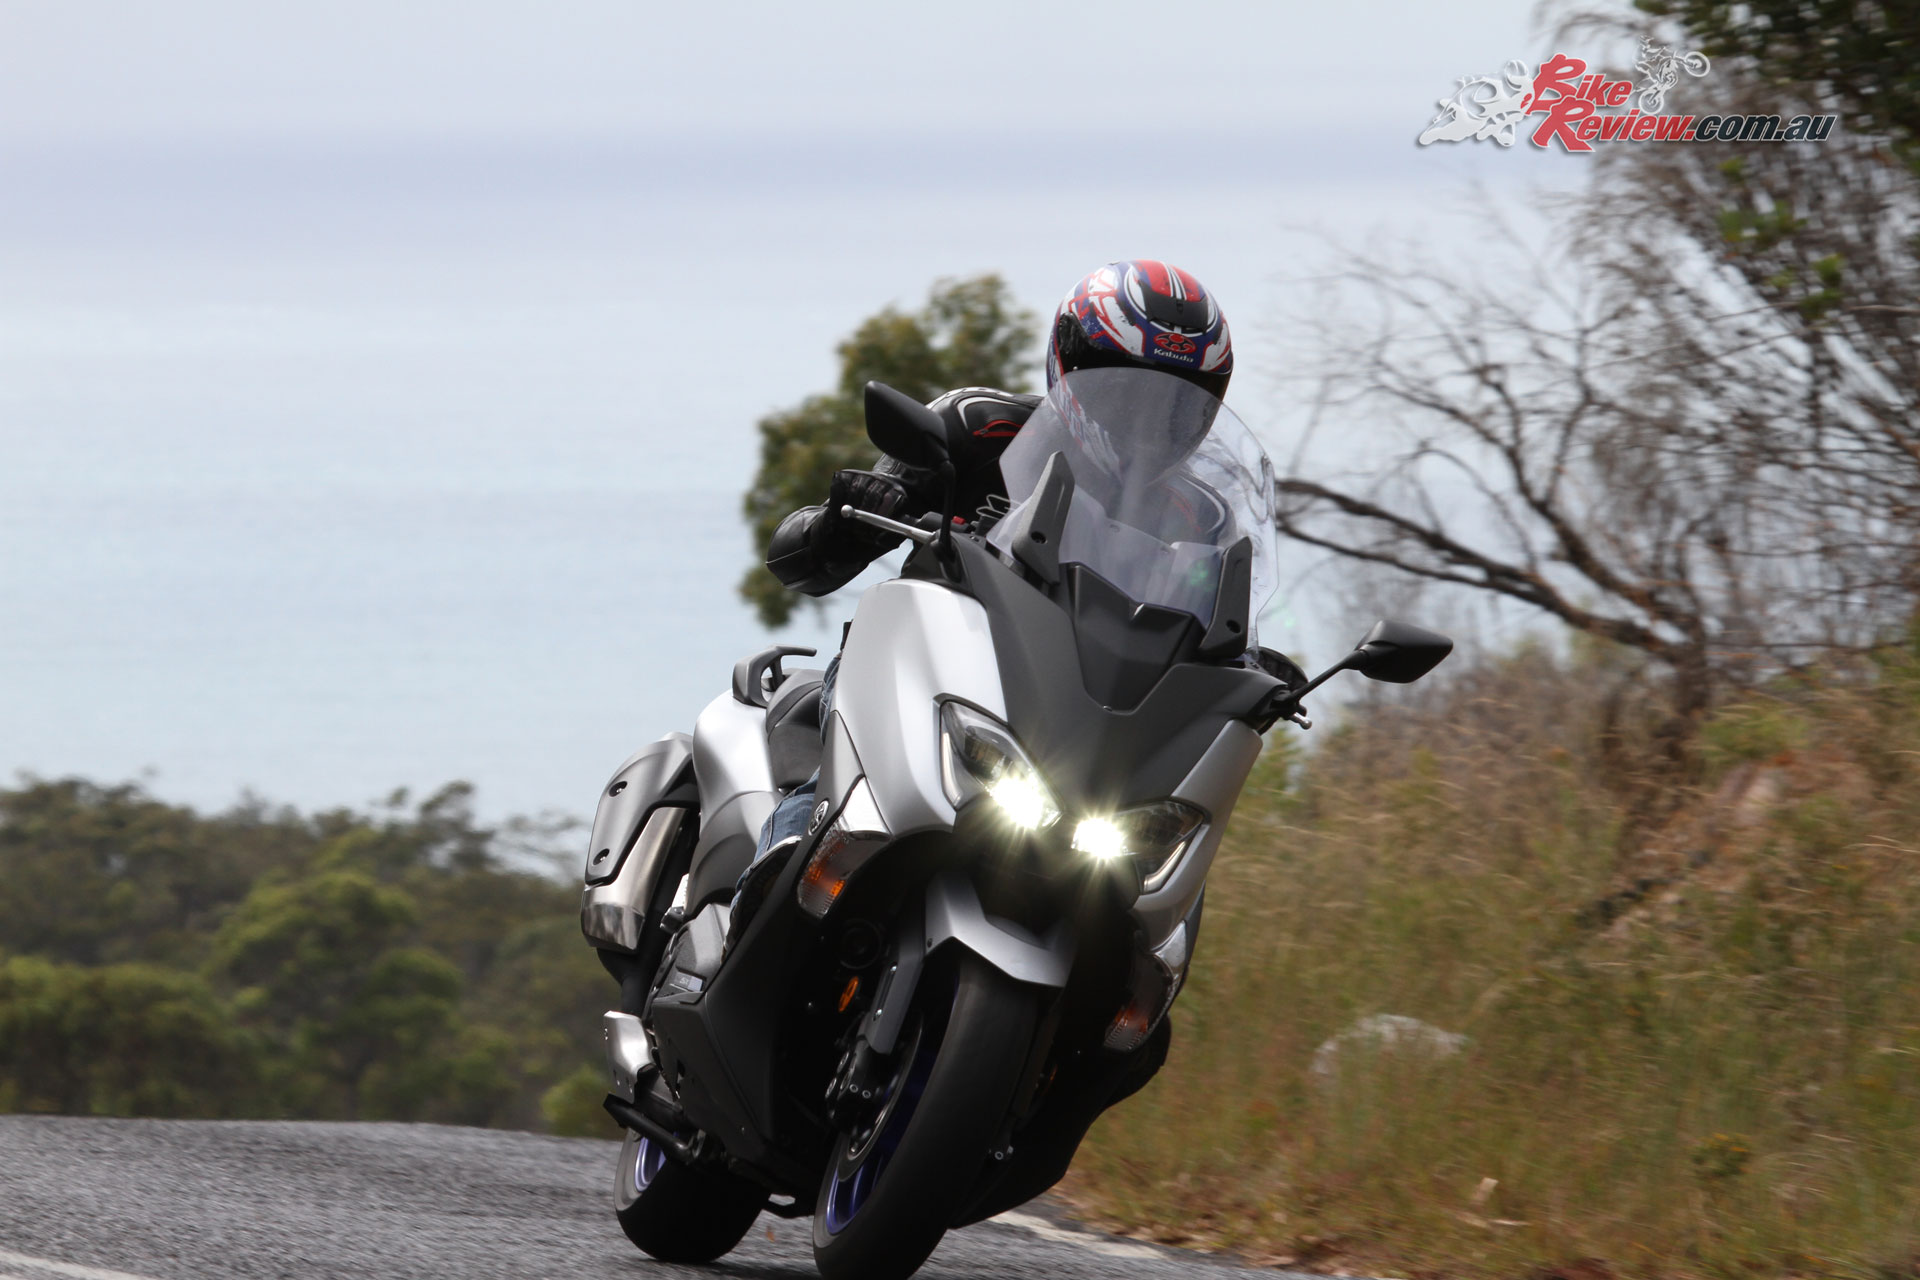 The TMax SX is exceptionally stable, even with heavy side-winds, and it's easy to accidentally allow the speed to creep up on the open road without realising.